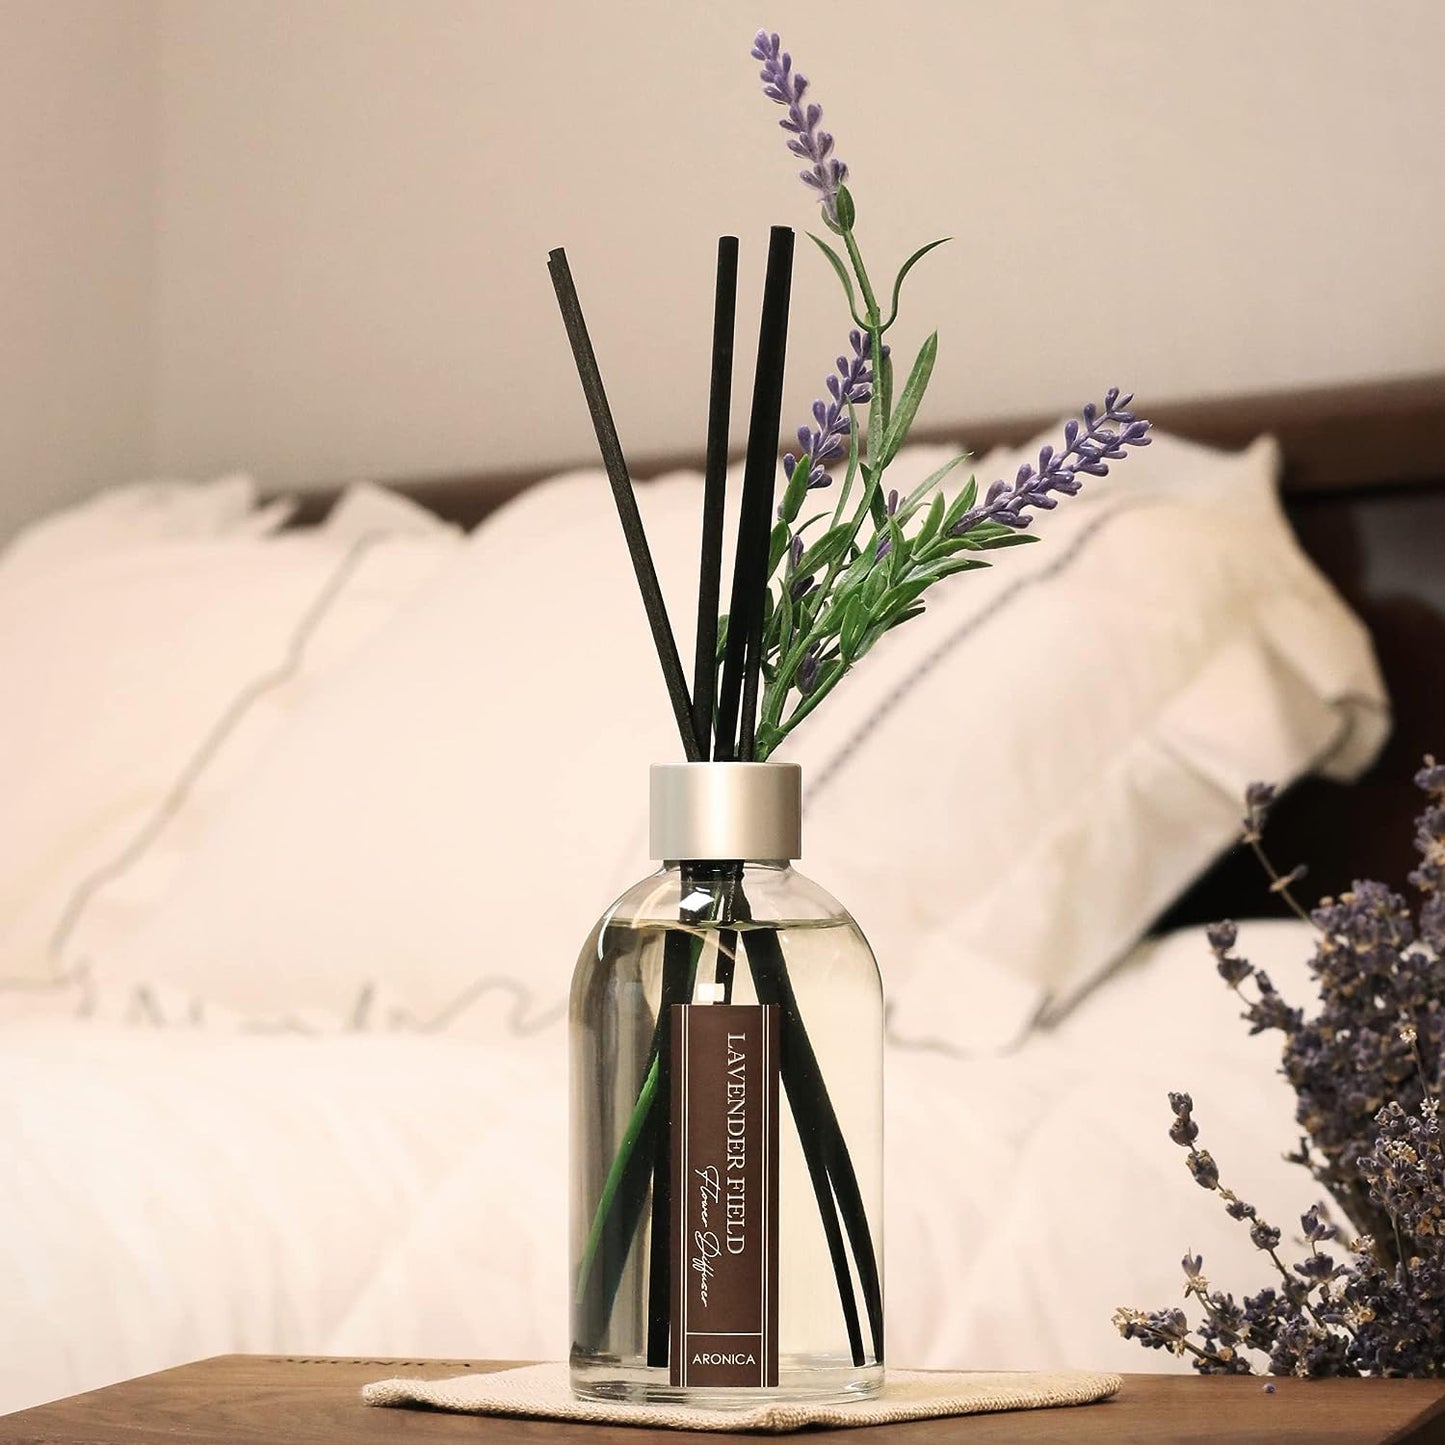 Lavender Field Flower Reed Diffuser - Aromatherapy Scented Oil Diffuser for Home and Office Decor, Relaxing Aesthetic Fragrance, Bathroom Essential Oil Diffusers Set, Elegant Desk Air Fresheners, 6.76 oz